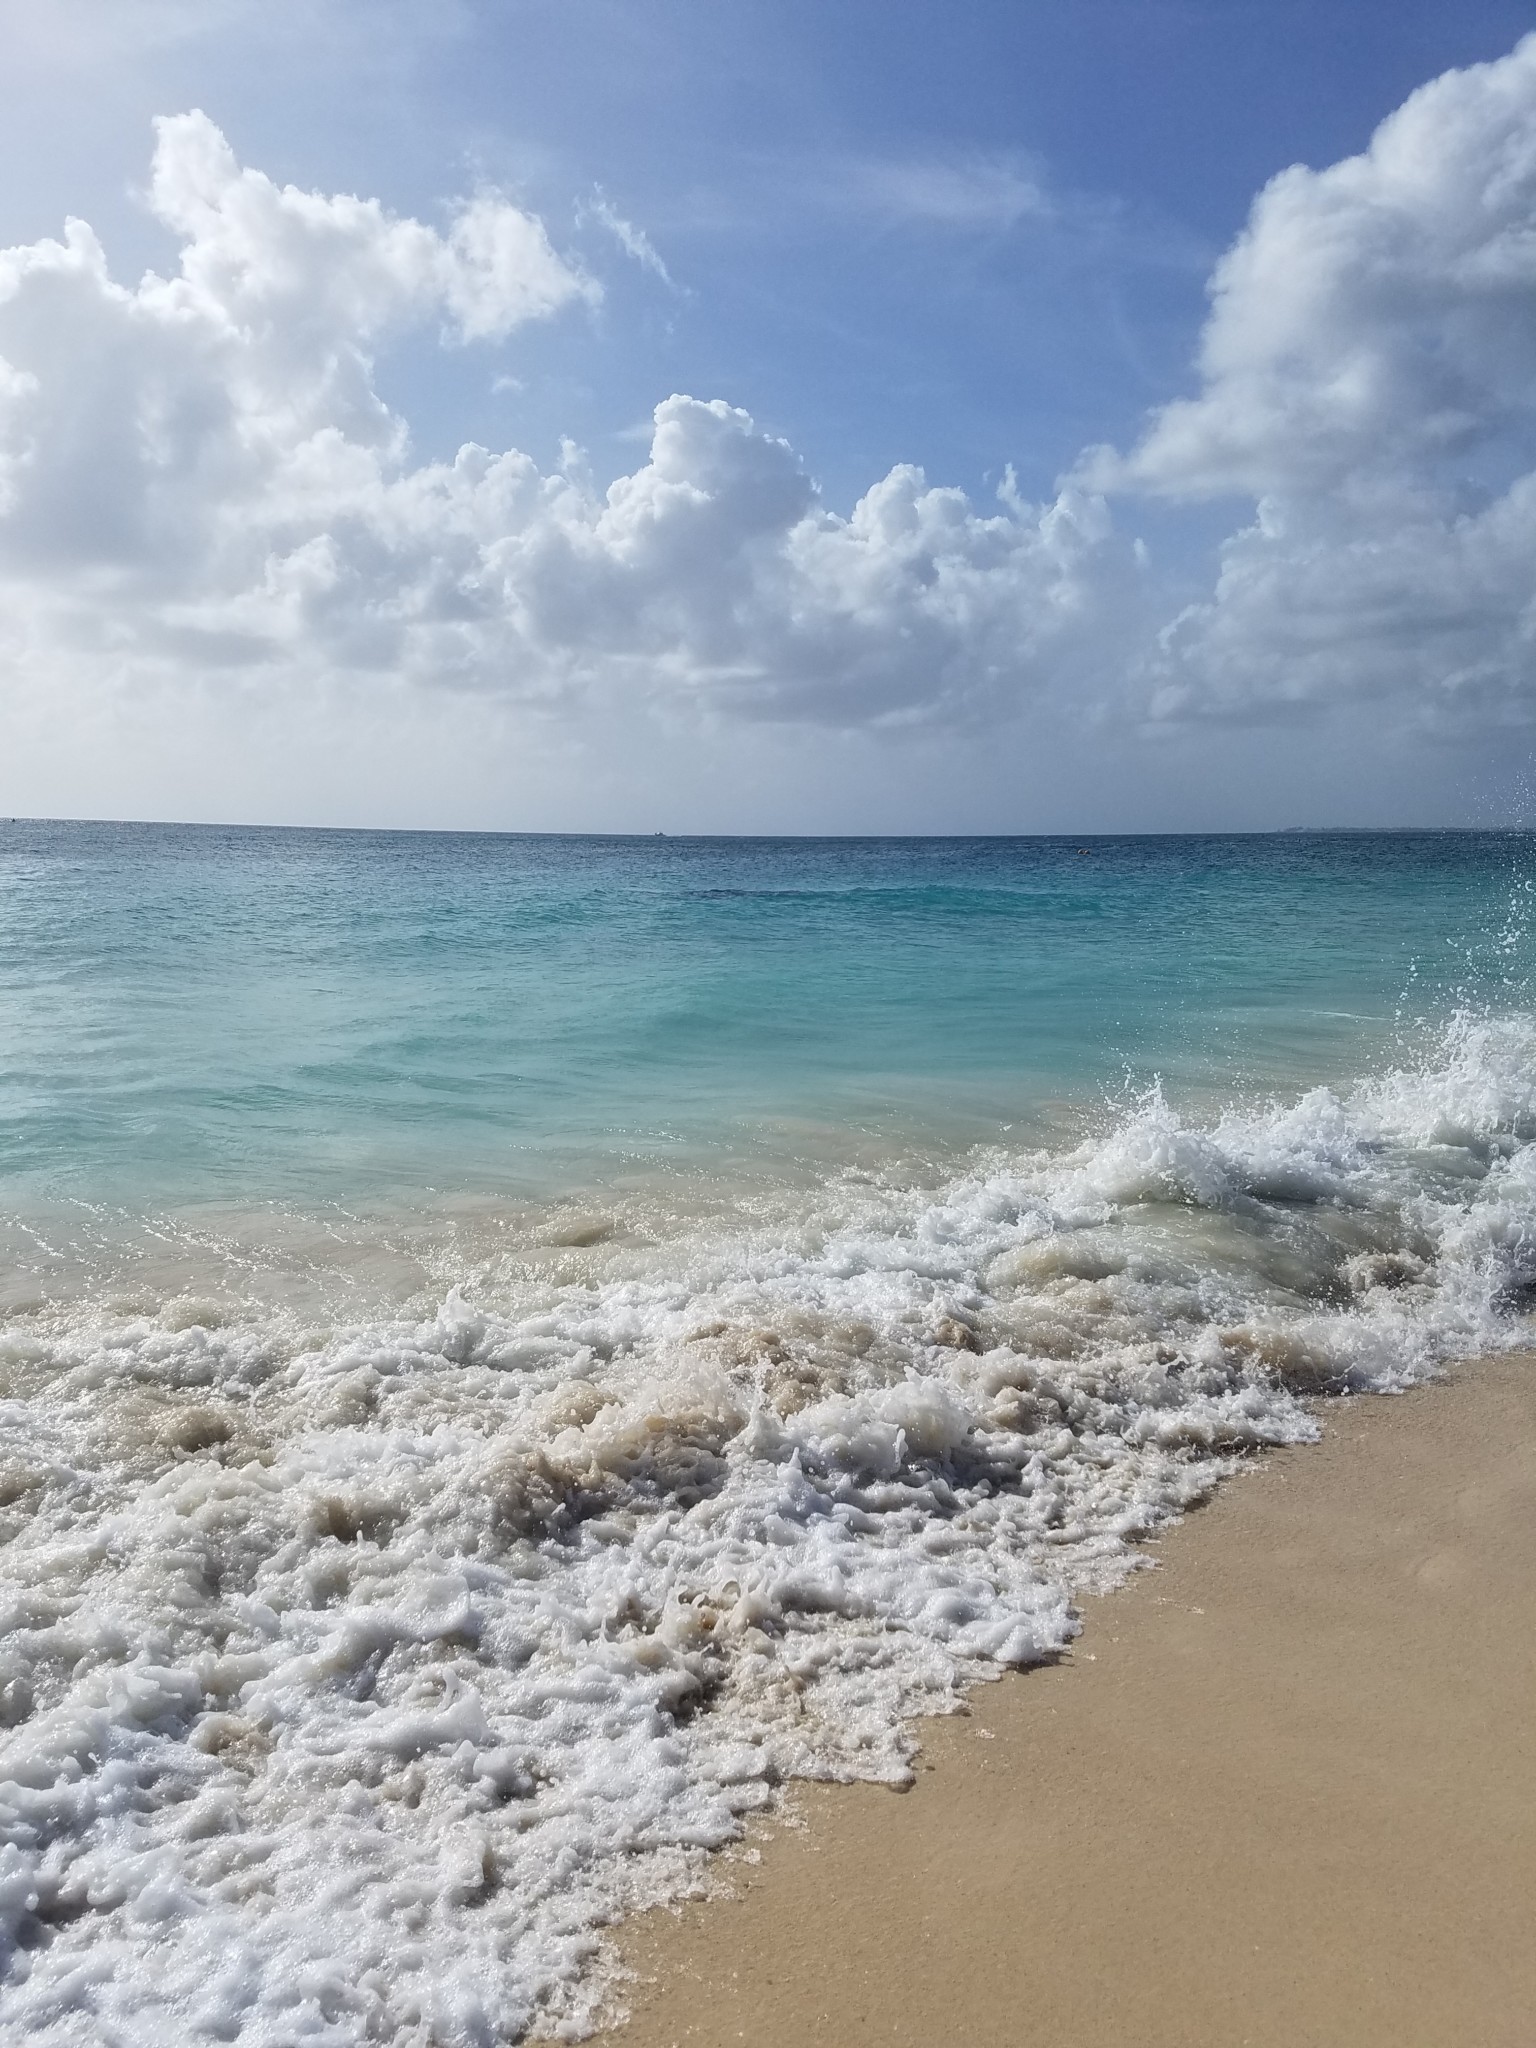 This is the easiest Travel Guide I have written. Grand Cayman takes away the hectic lifestyle and replaces it with days and nights doing nothing.